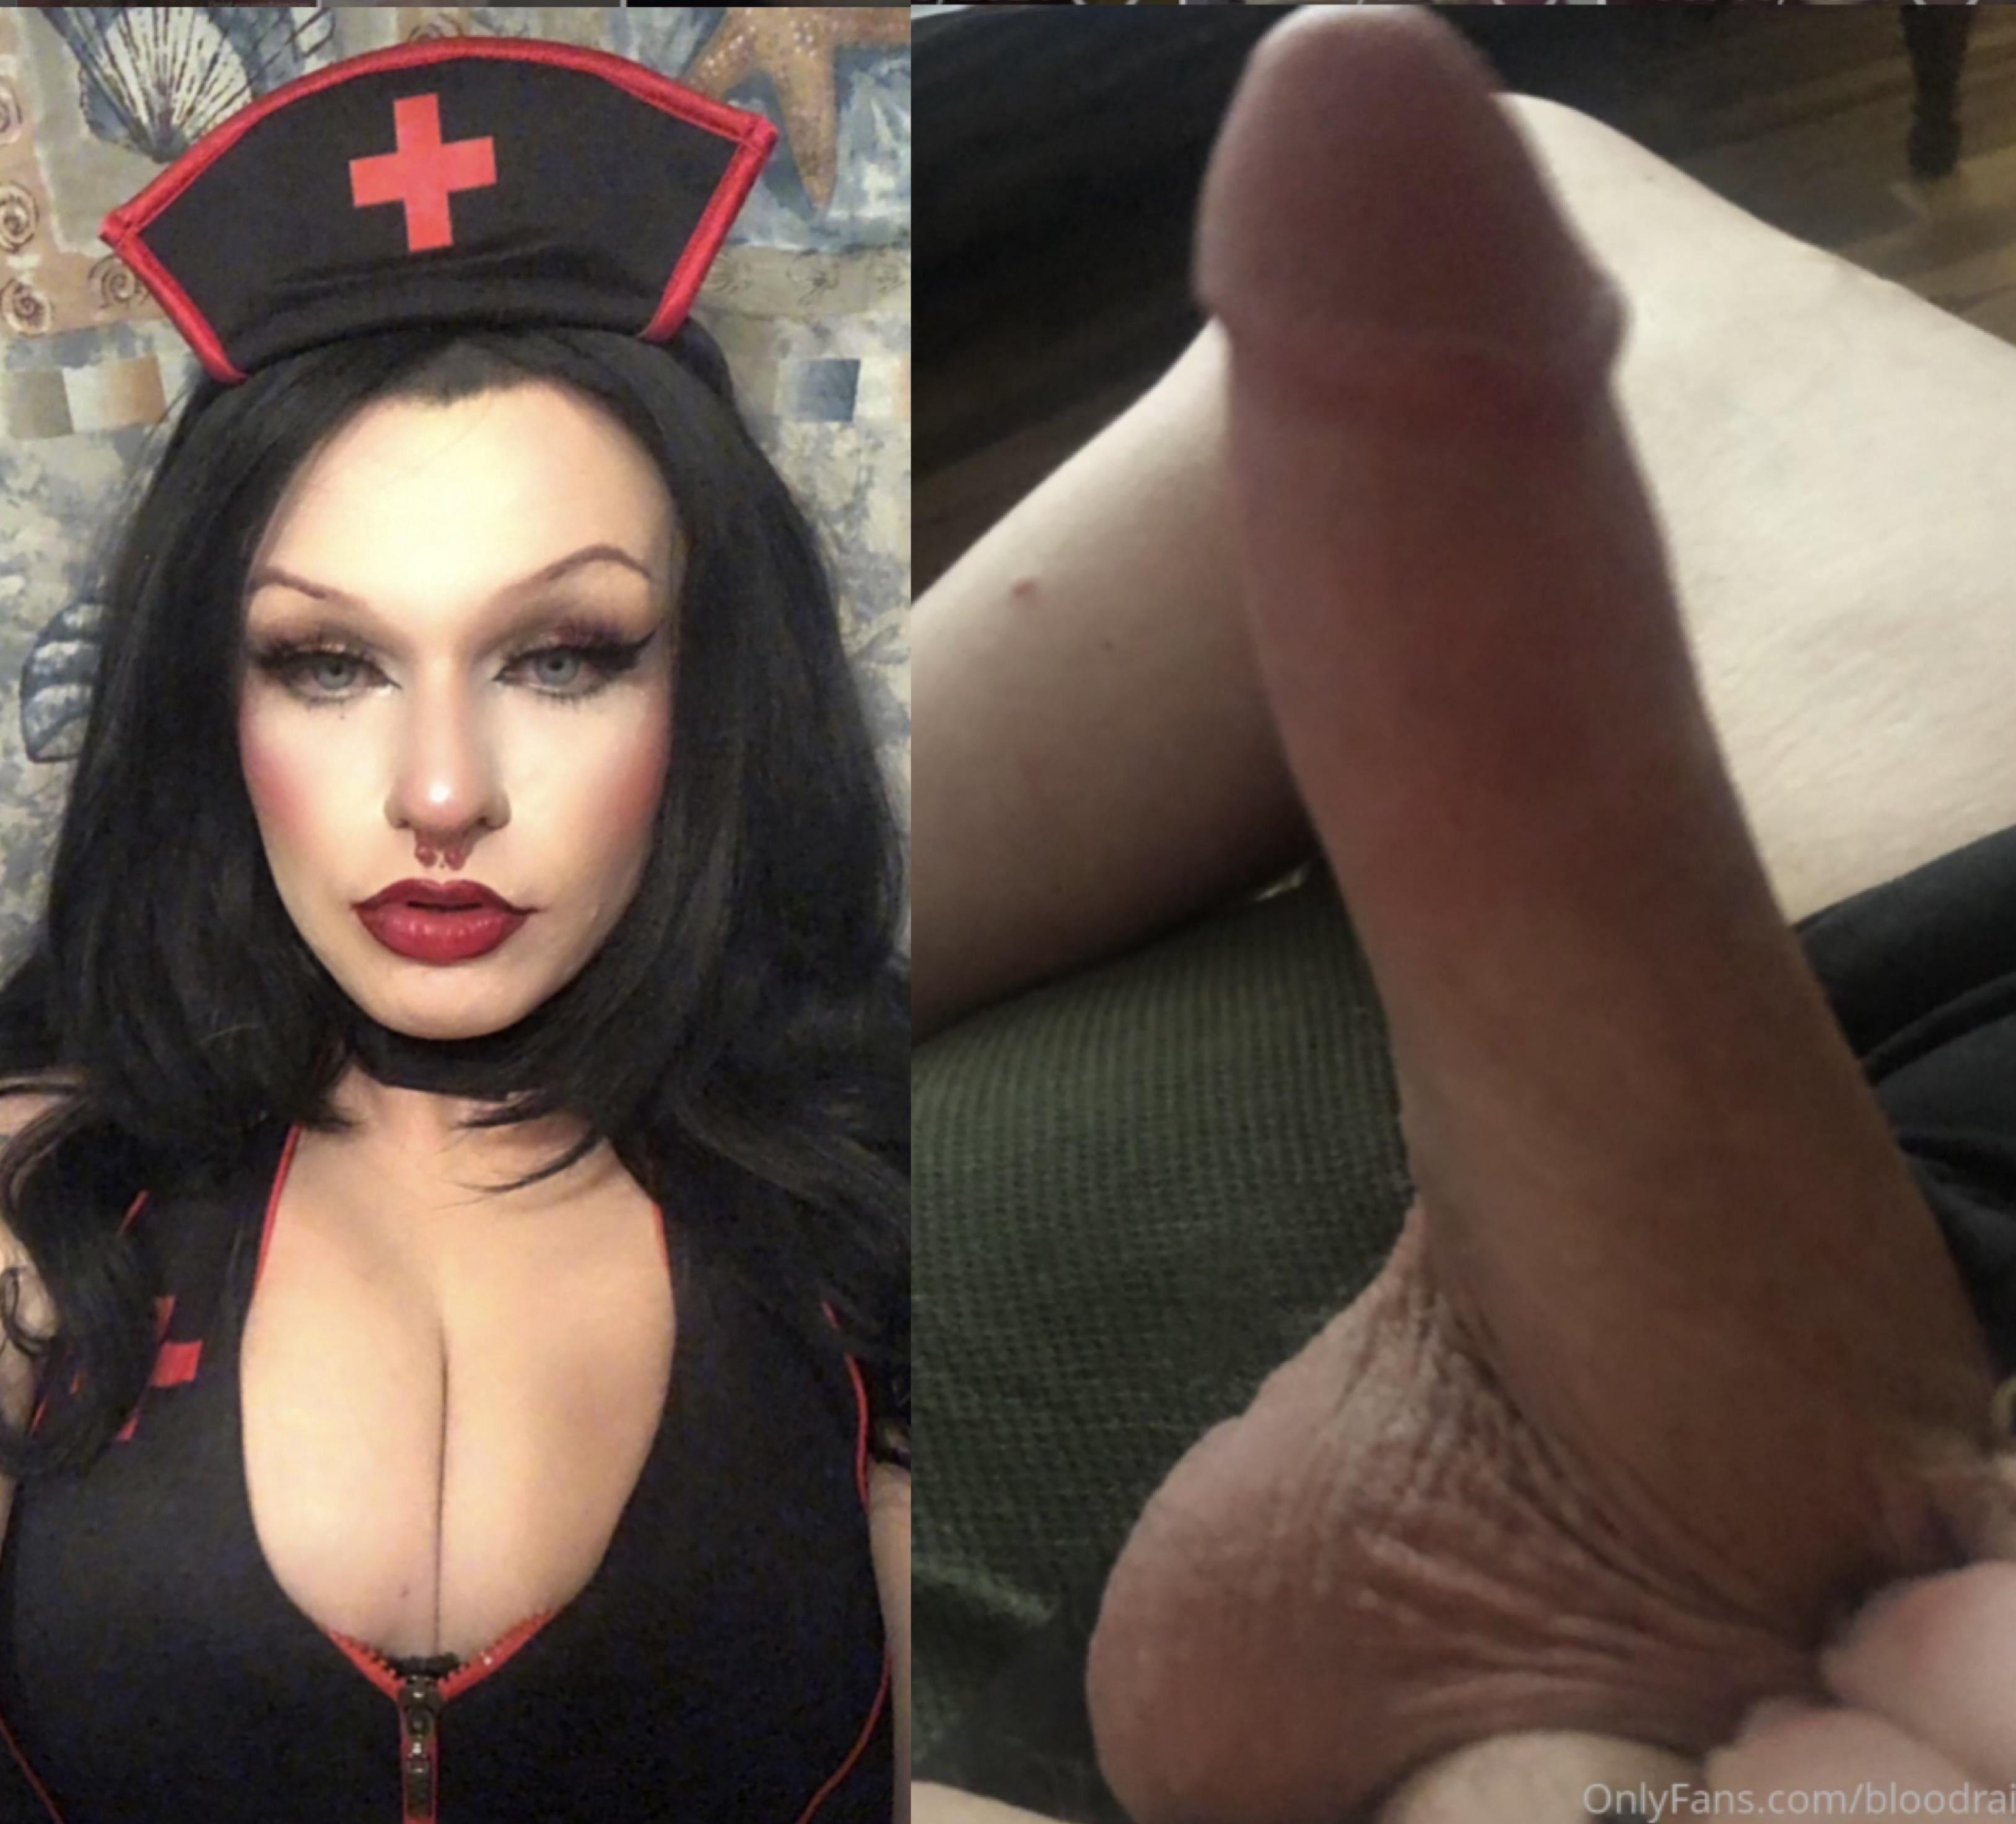 Hi Ill be your nurse for the evening Ready to